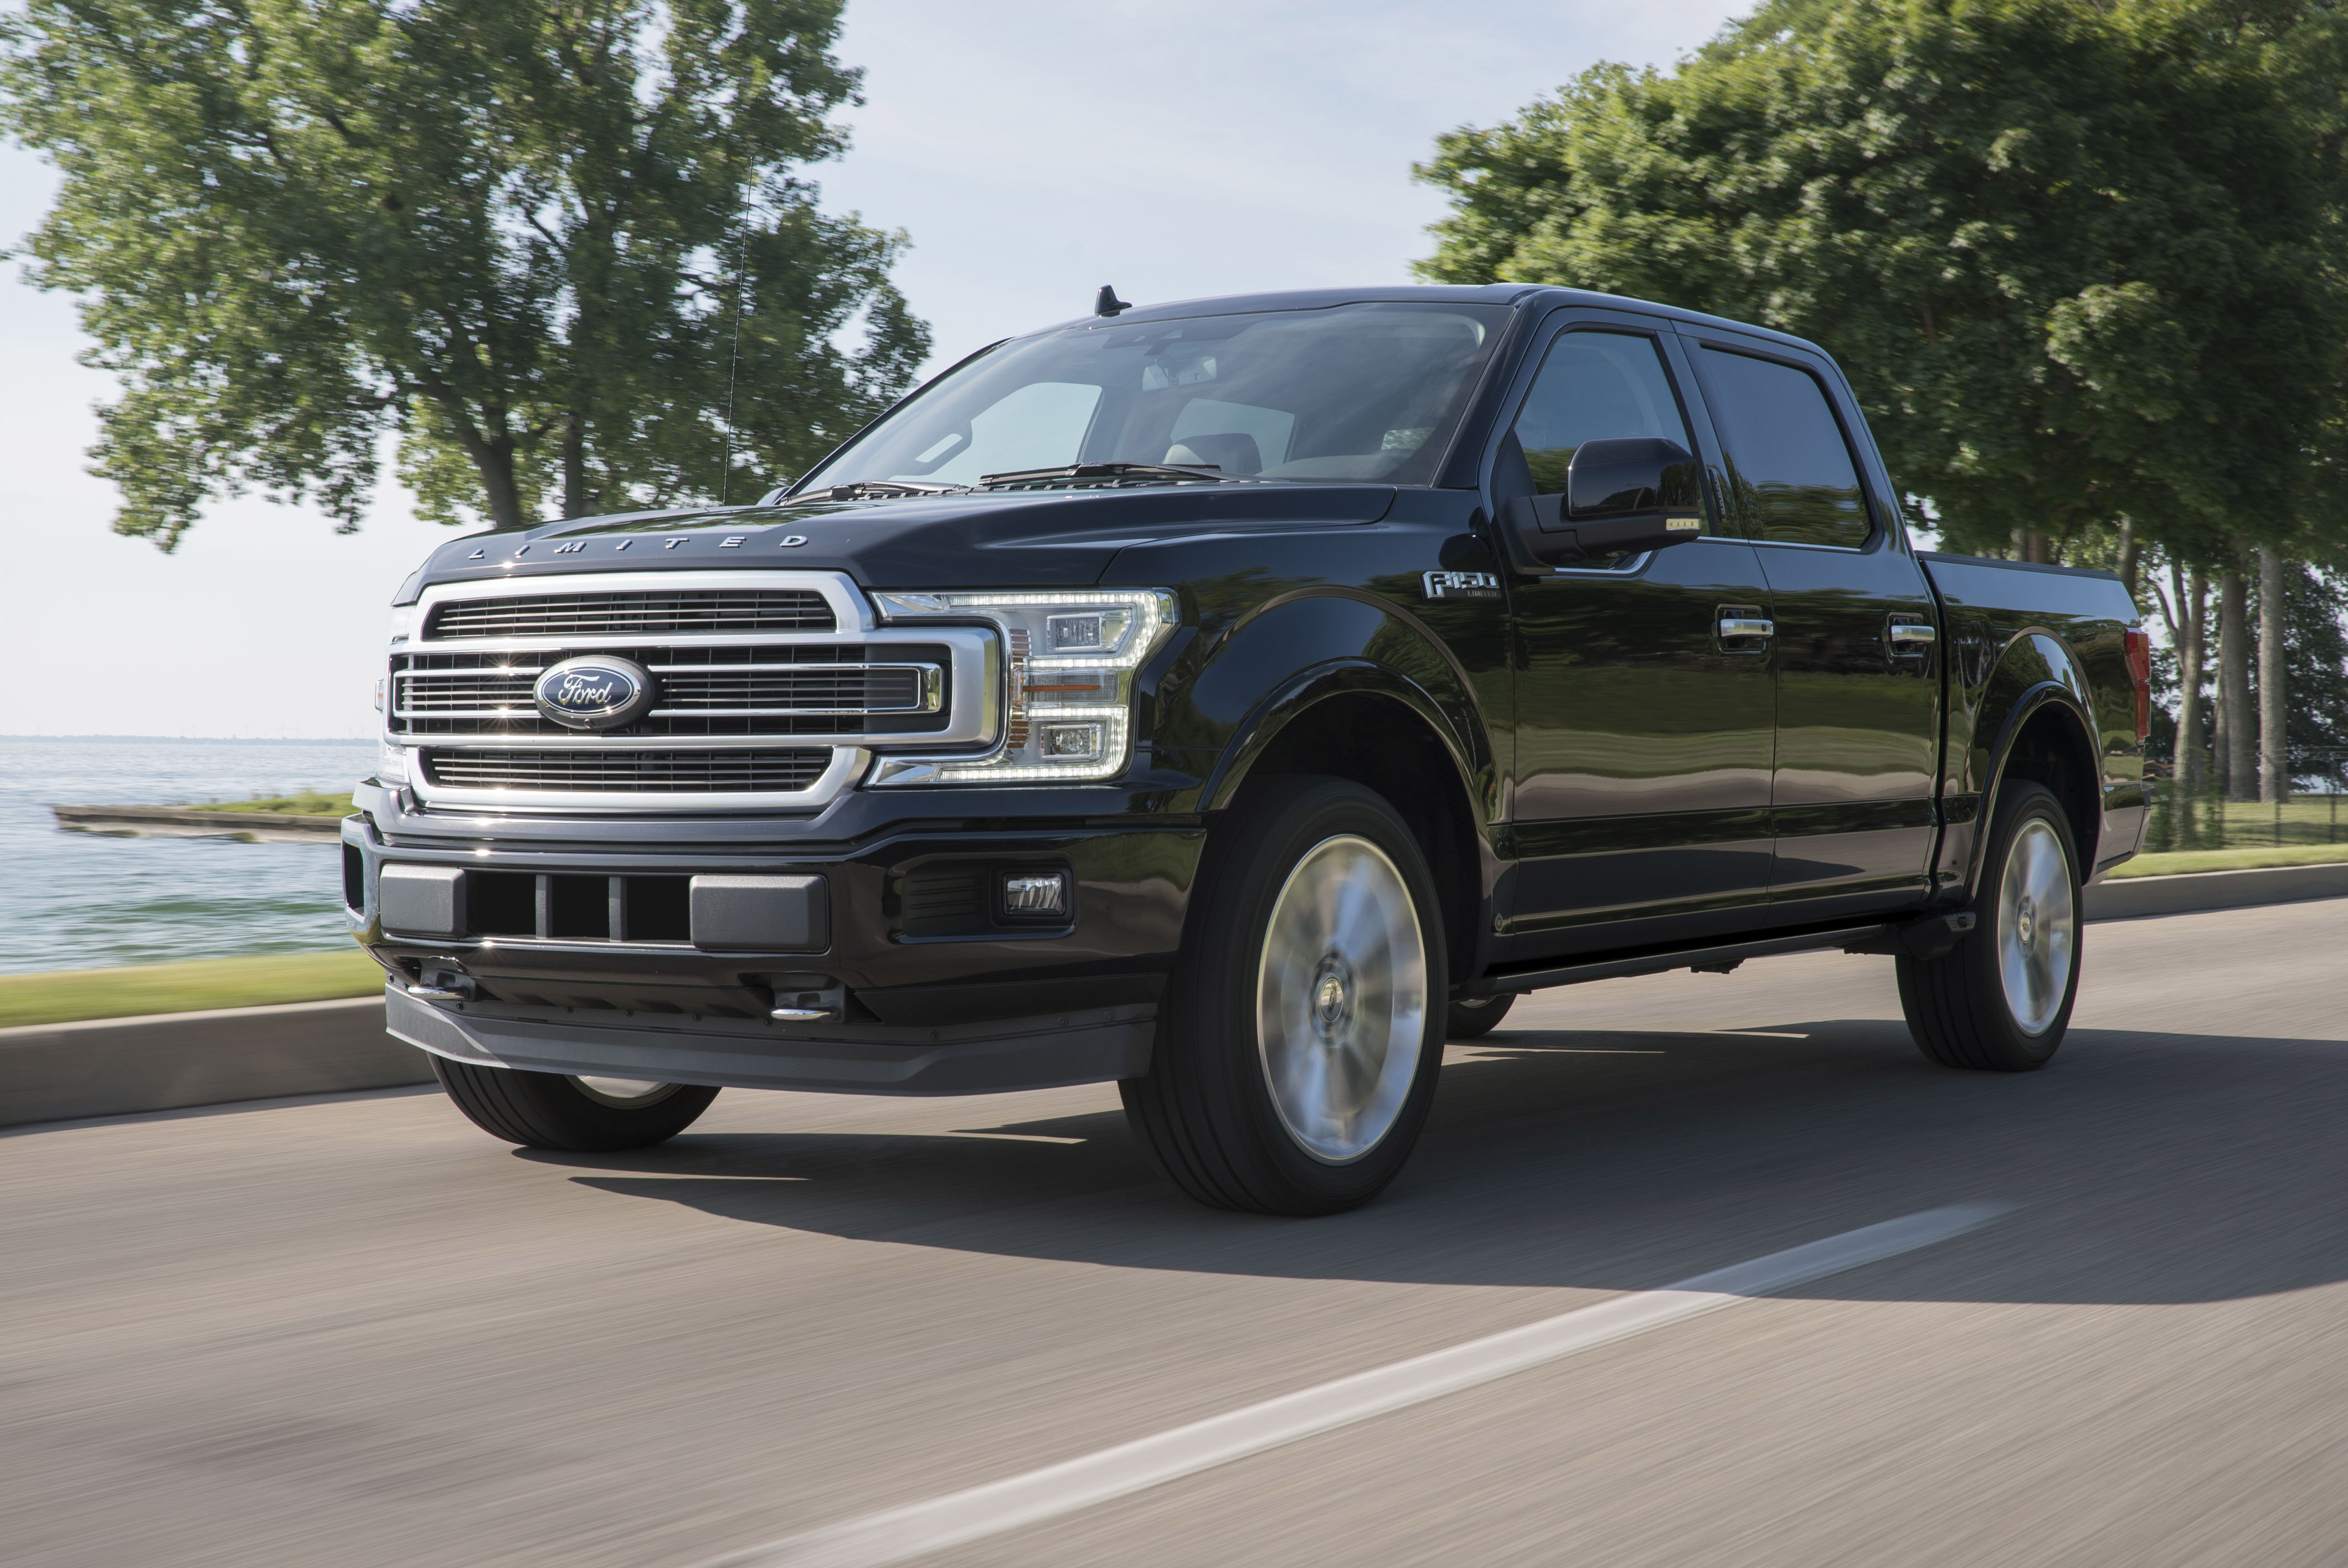 Roger Rivero : Ford F-150 Limited ¡Lujo y poder!